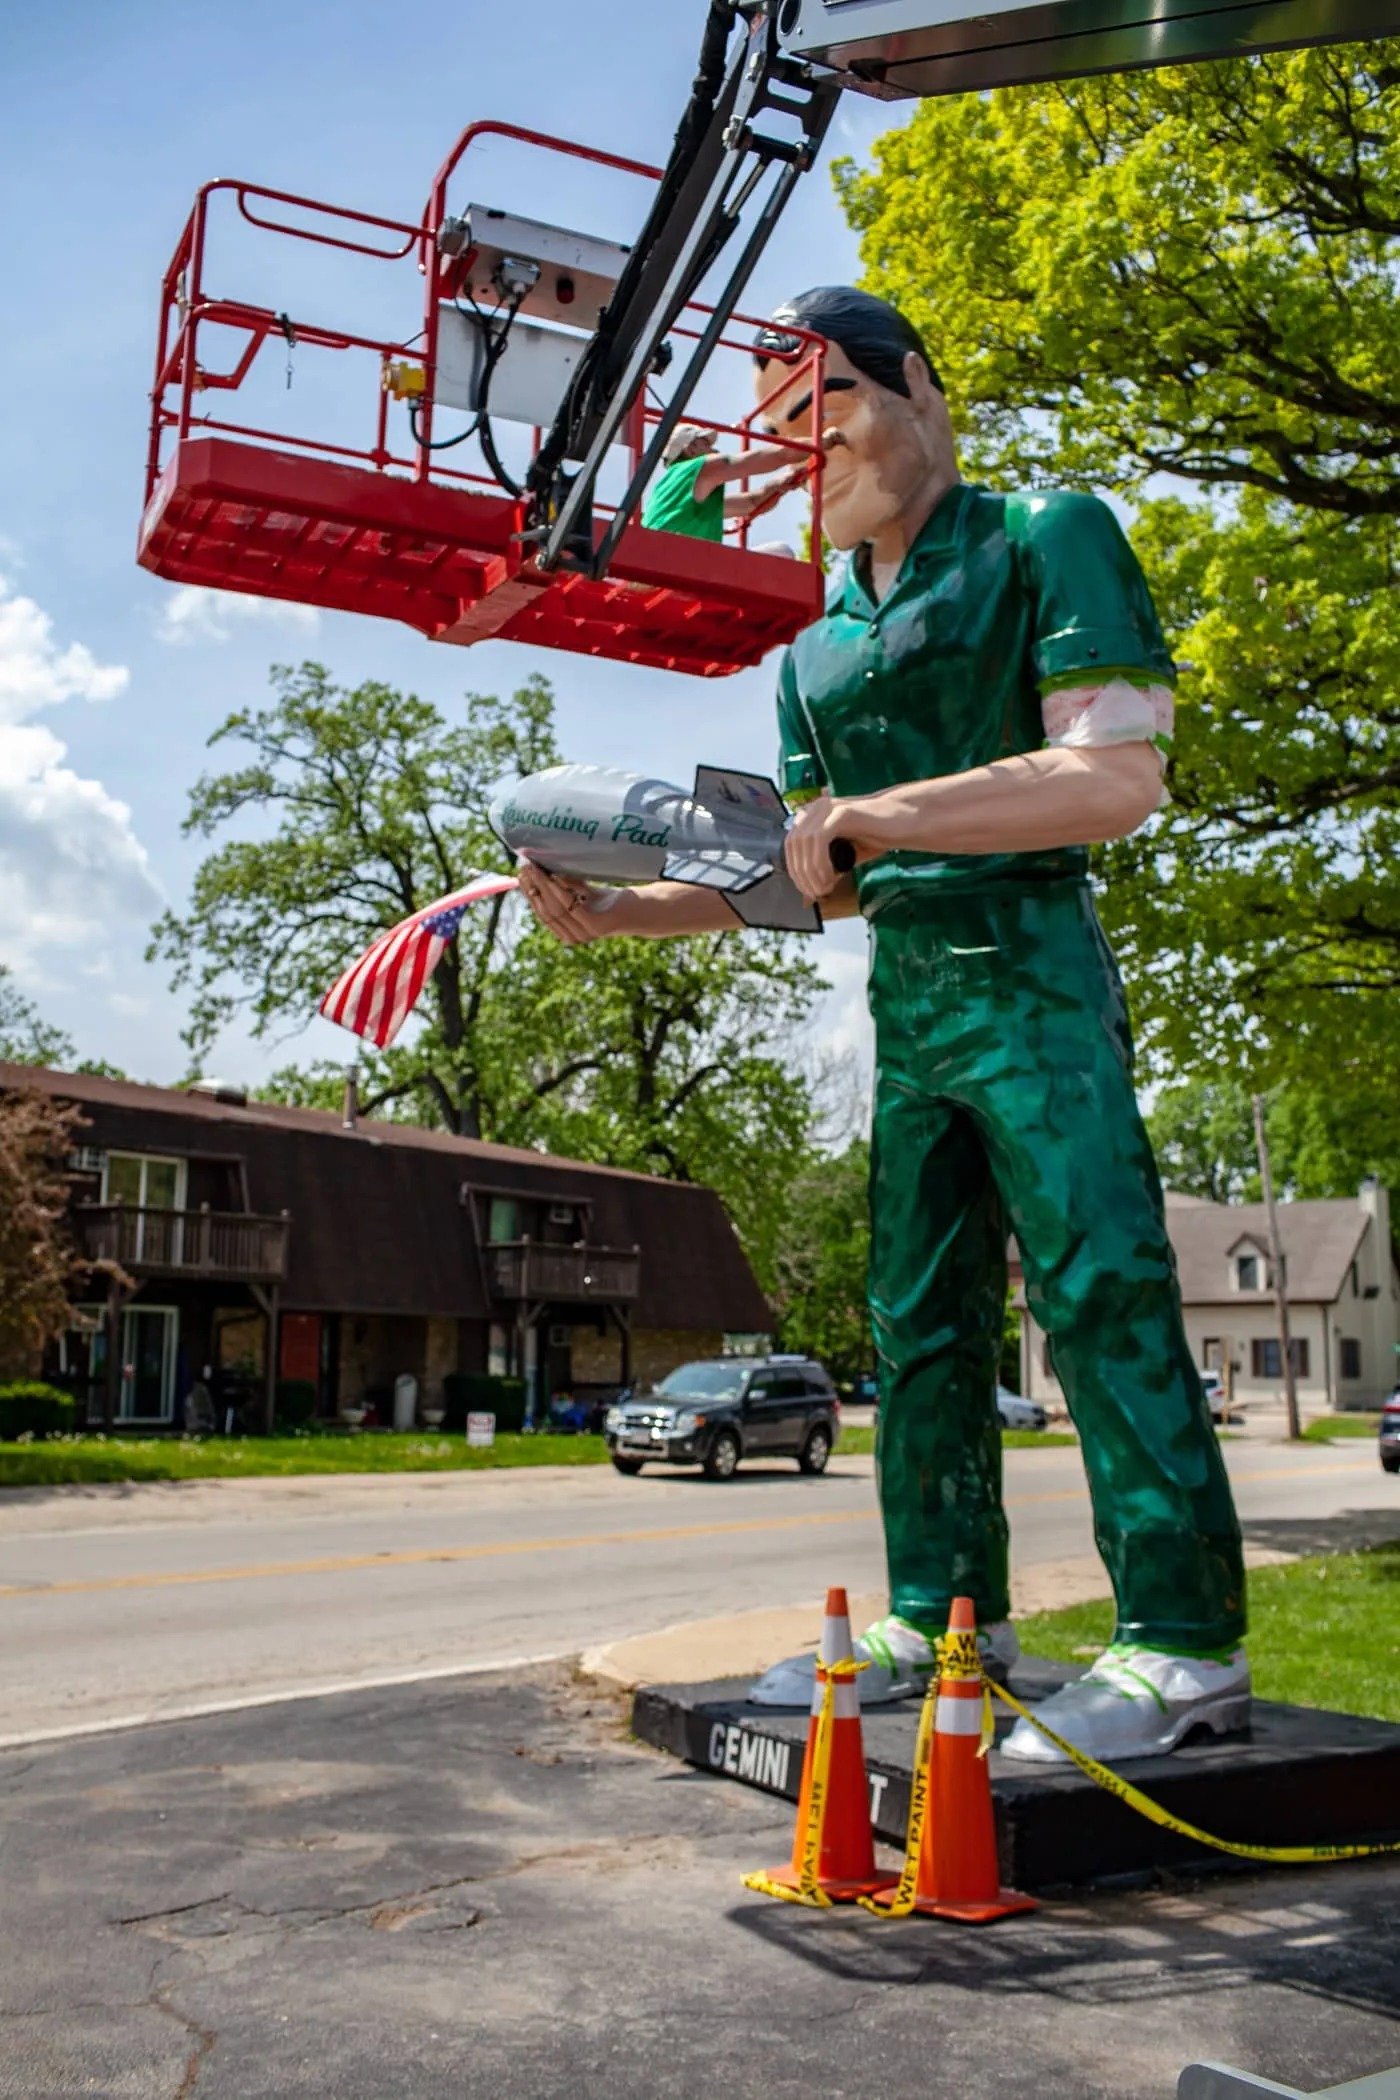 The Gemini Giant Muffler man without his helmet on at the Launching Pad Drive In in Wilmington, Illinois on Route 66.